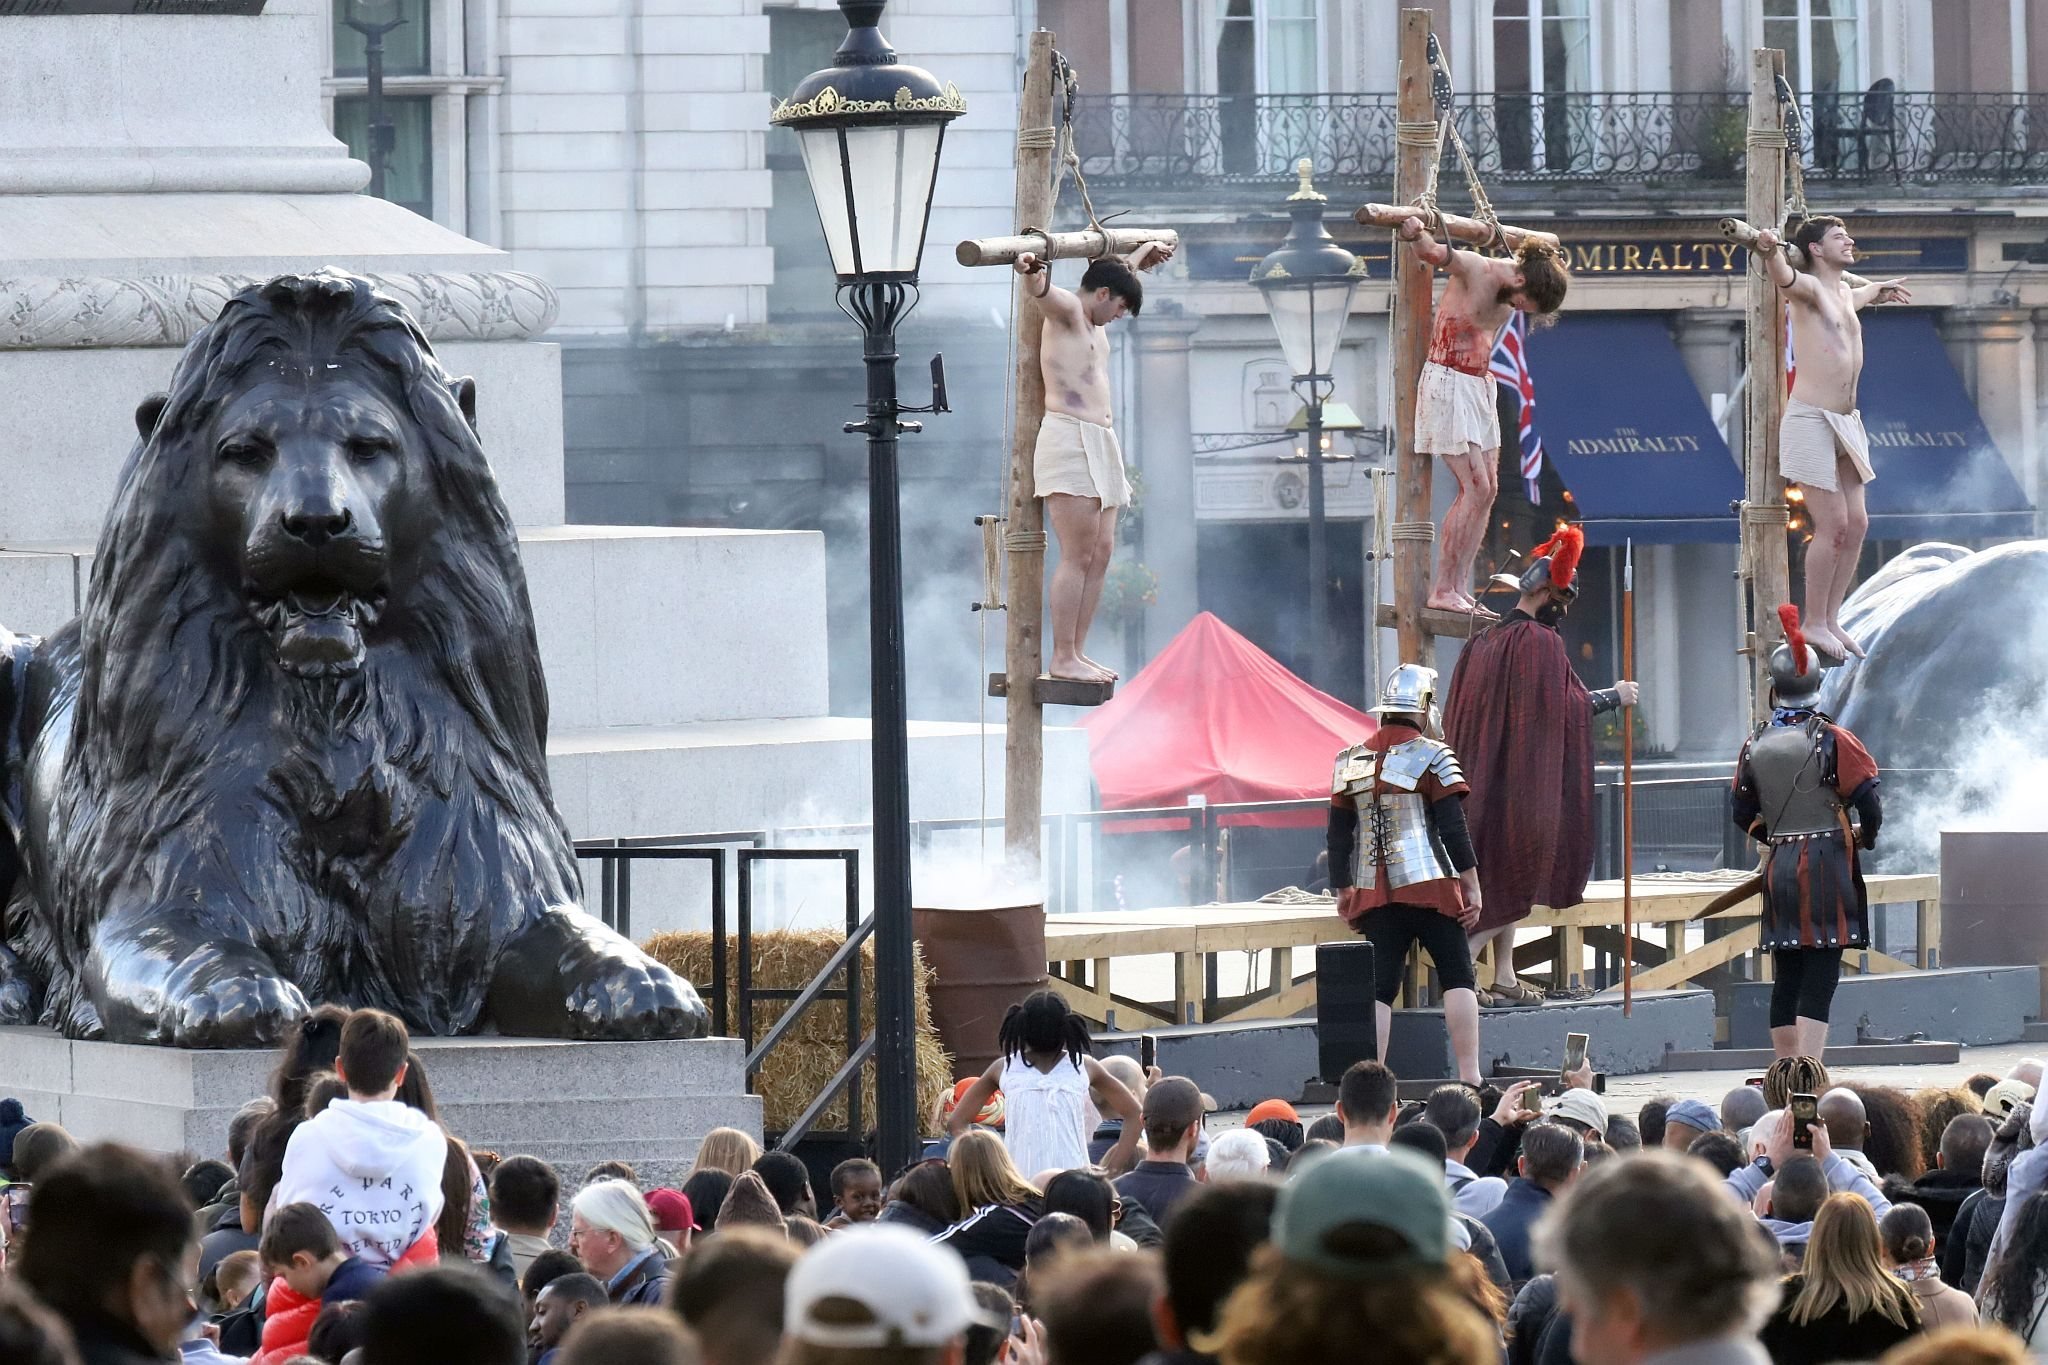 The Good Friday Wintershall Easter Passion Play "The Passion of Jesus" presented at Trafalgar Square in London. 7th April 2023. The famous Trafalgar Square lions by Edwin Landseer stand silent witness to Christ on the Cross.